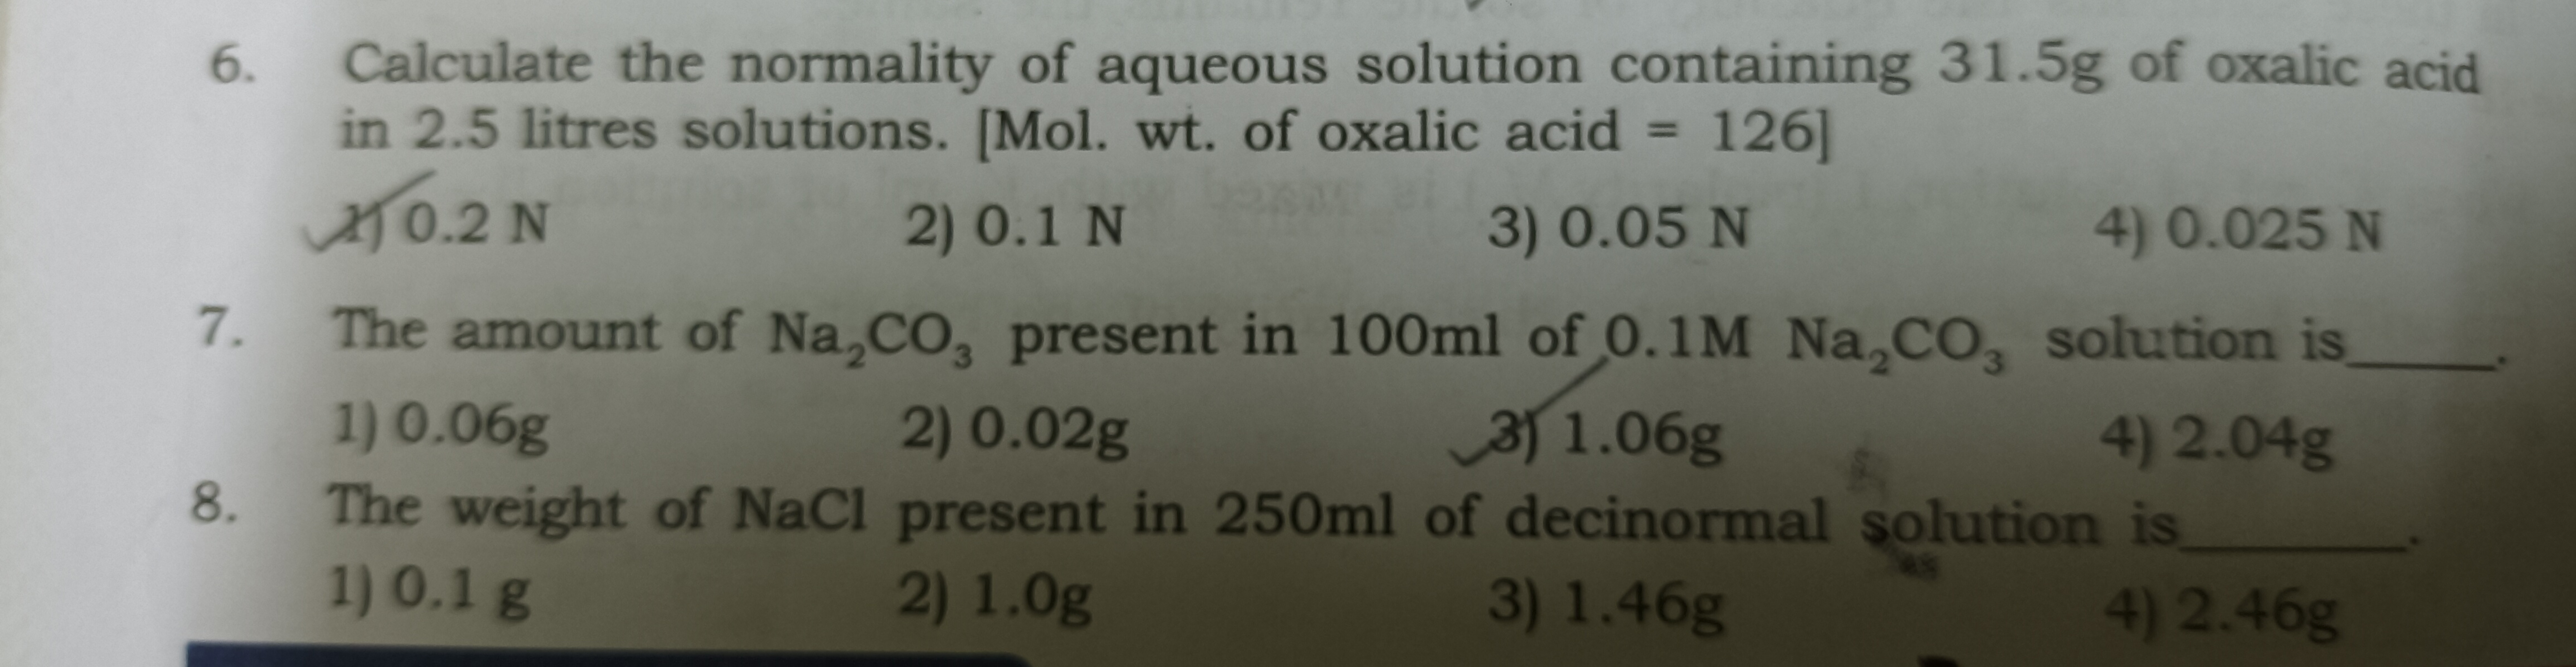 The weight of NaCl present in 250ml of decinormal solution is